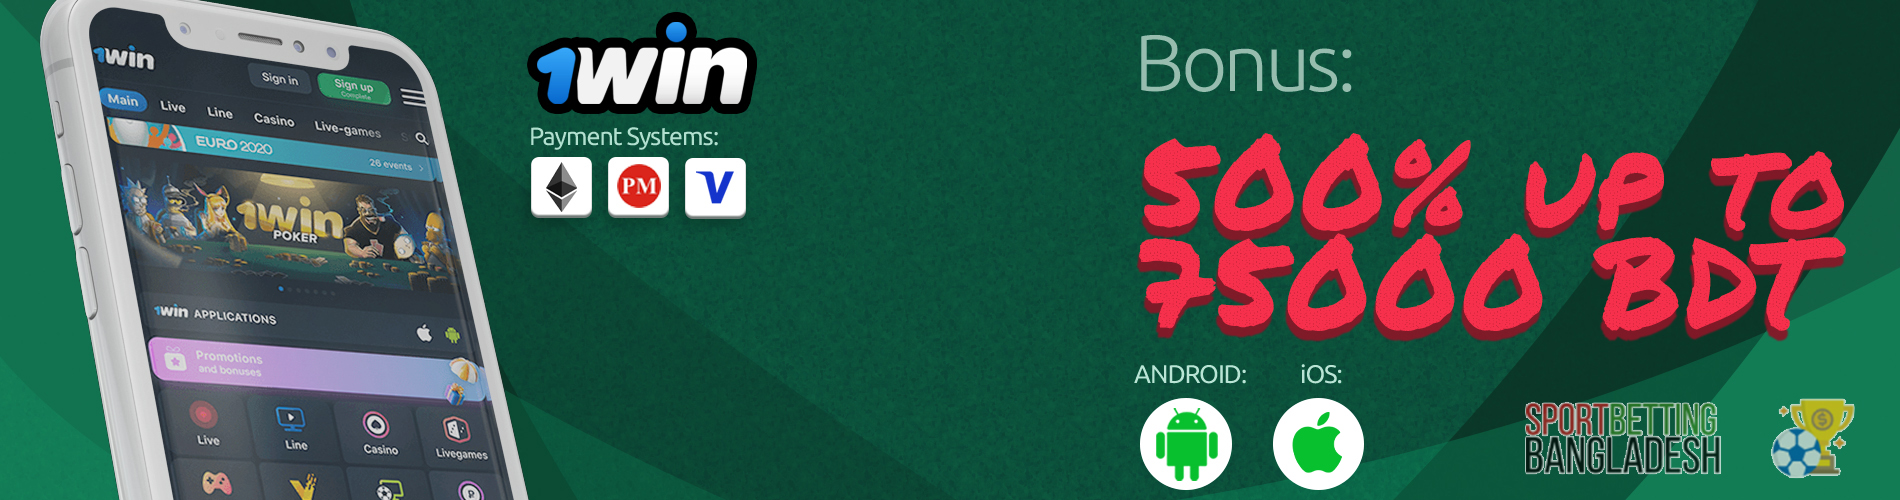 1win Bangladesh app: payment systems, available platforms, welcome bonus.